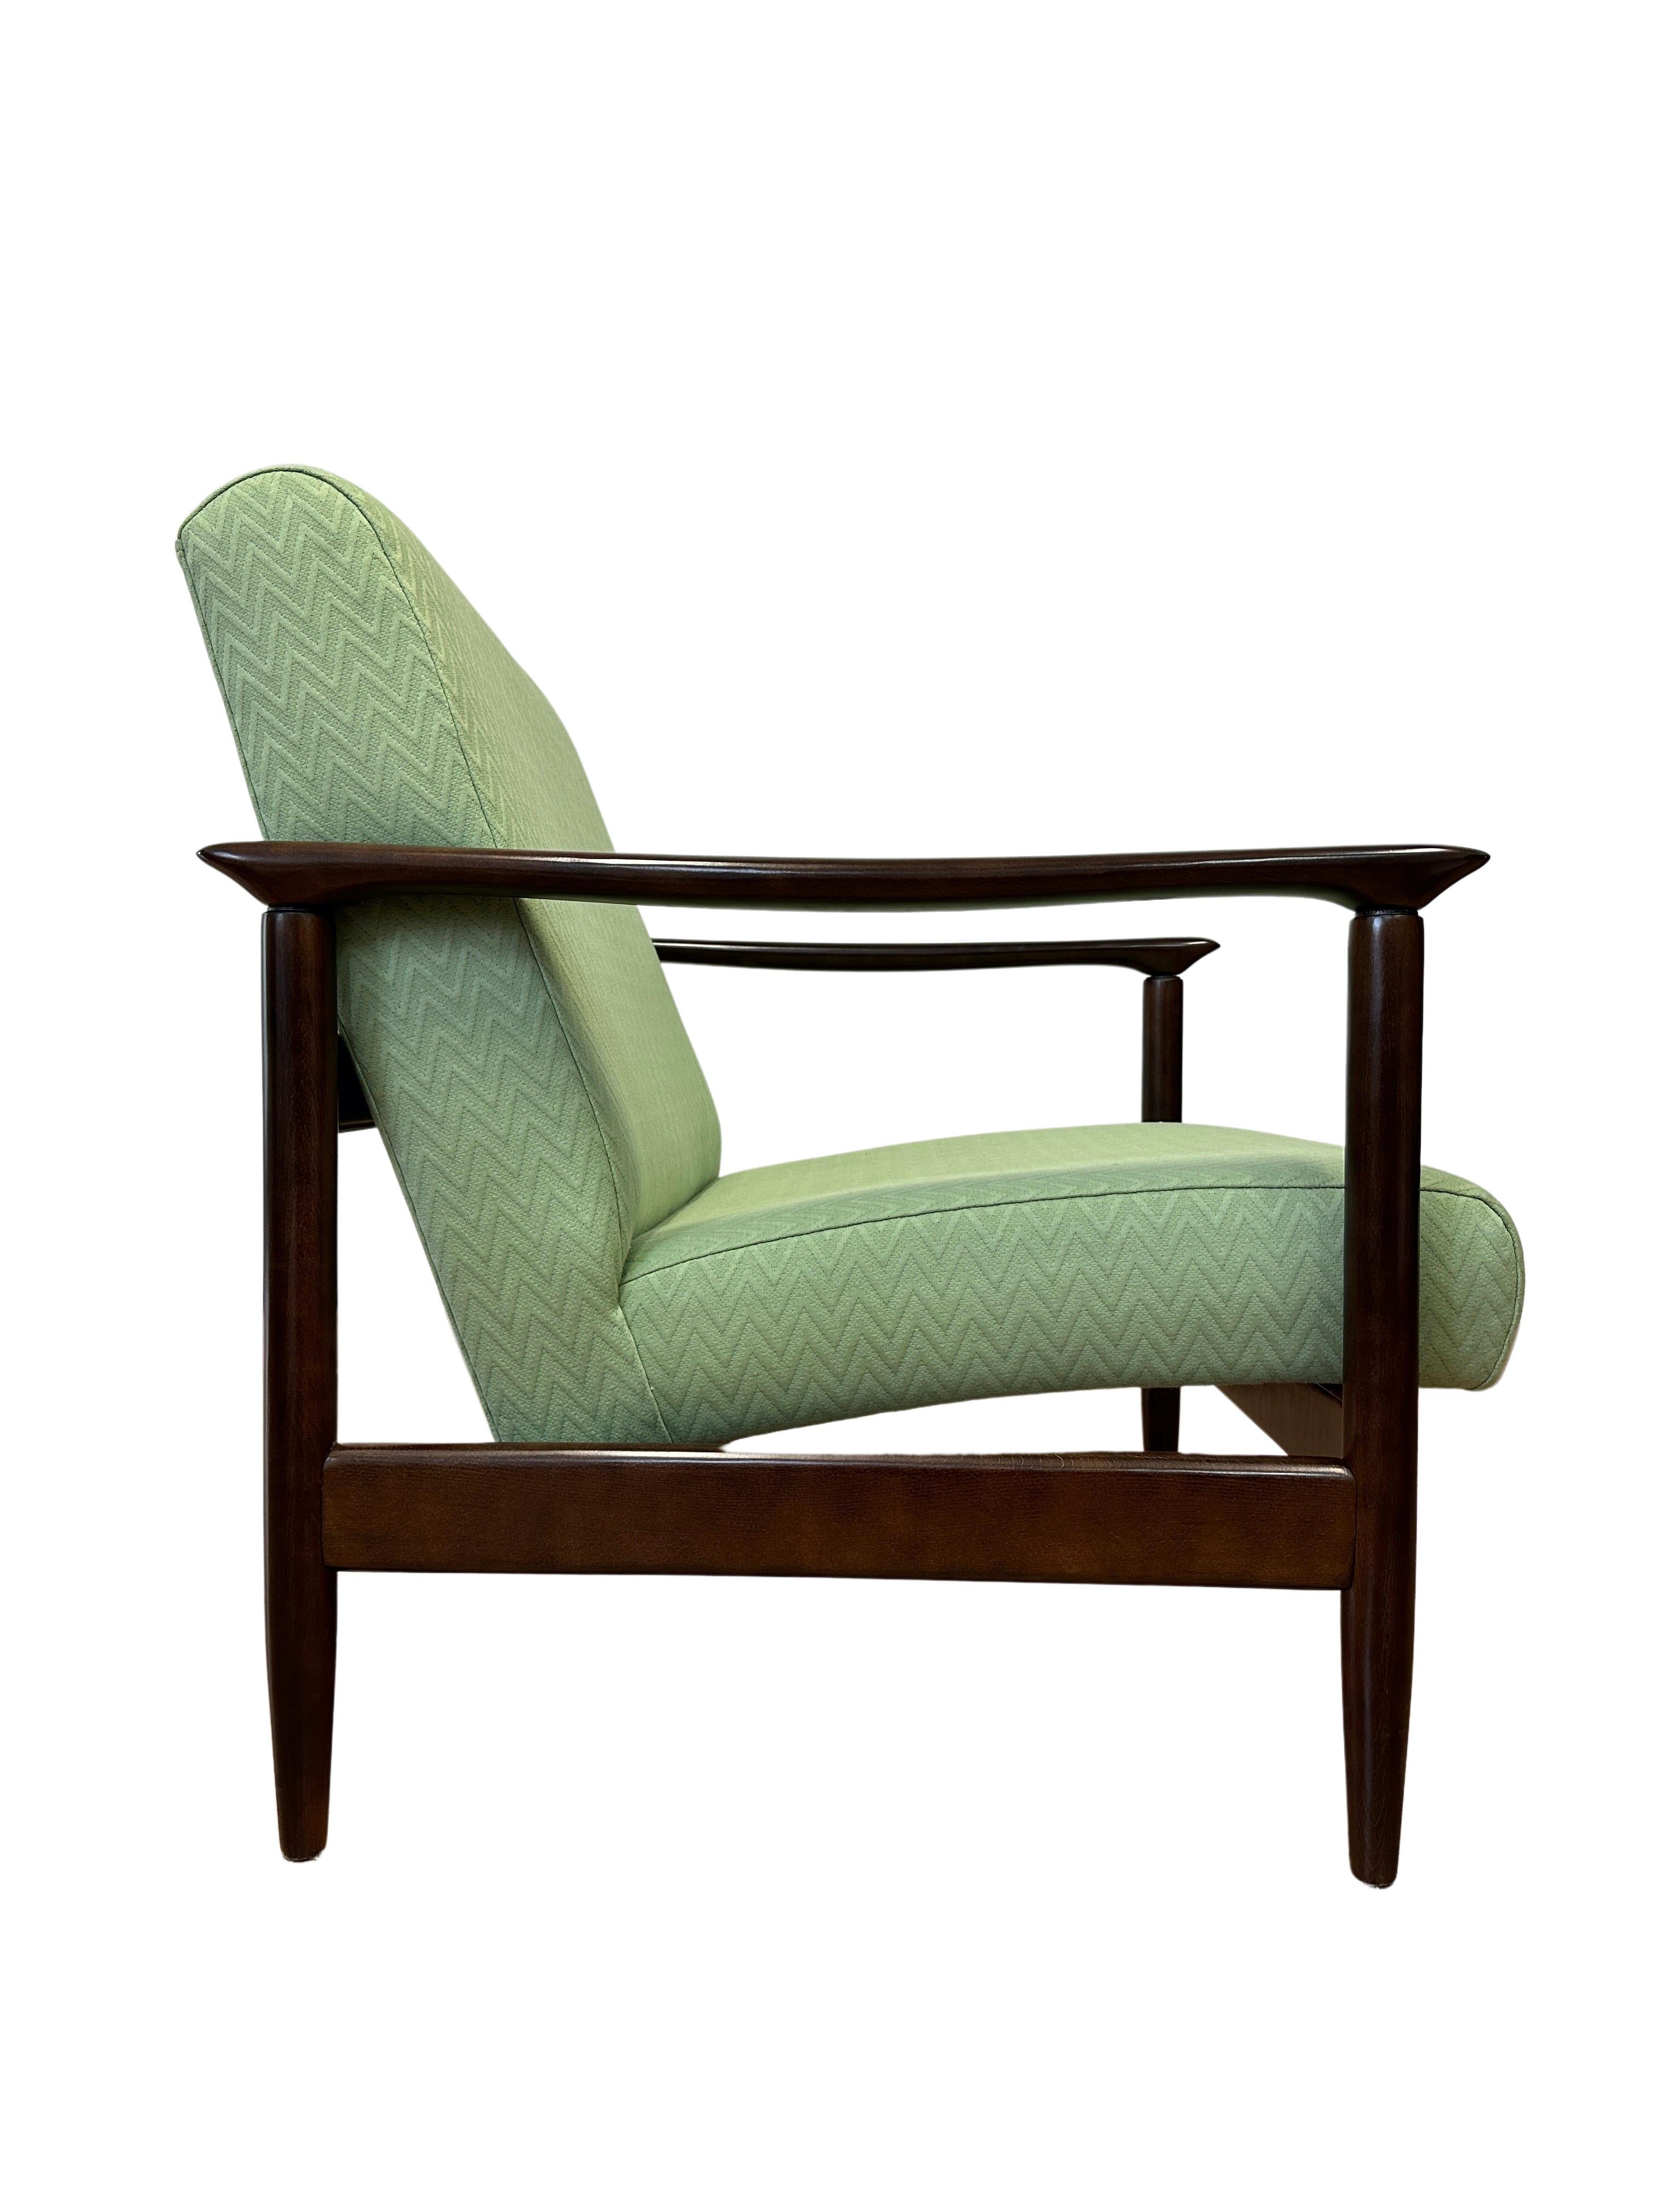 Hand-Crafted Mid Century Armchair in Green Missoni Upholstery, by Edmund Homa, 1960s For Sale